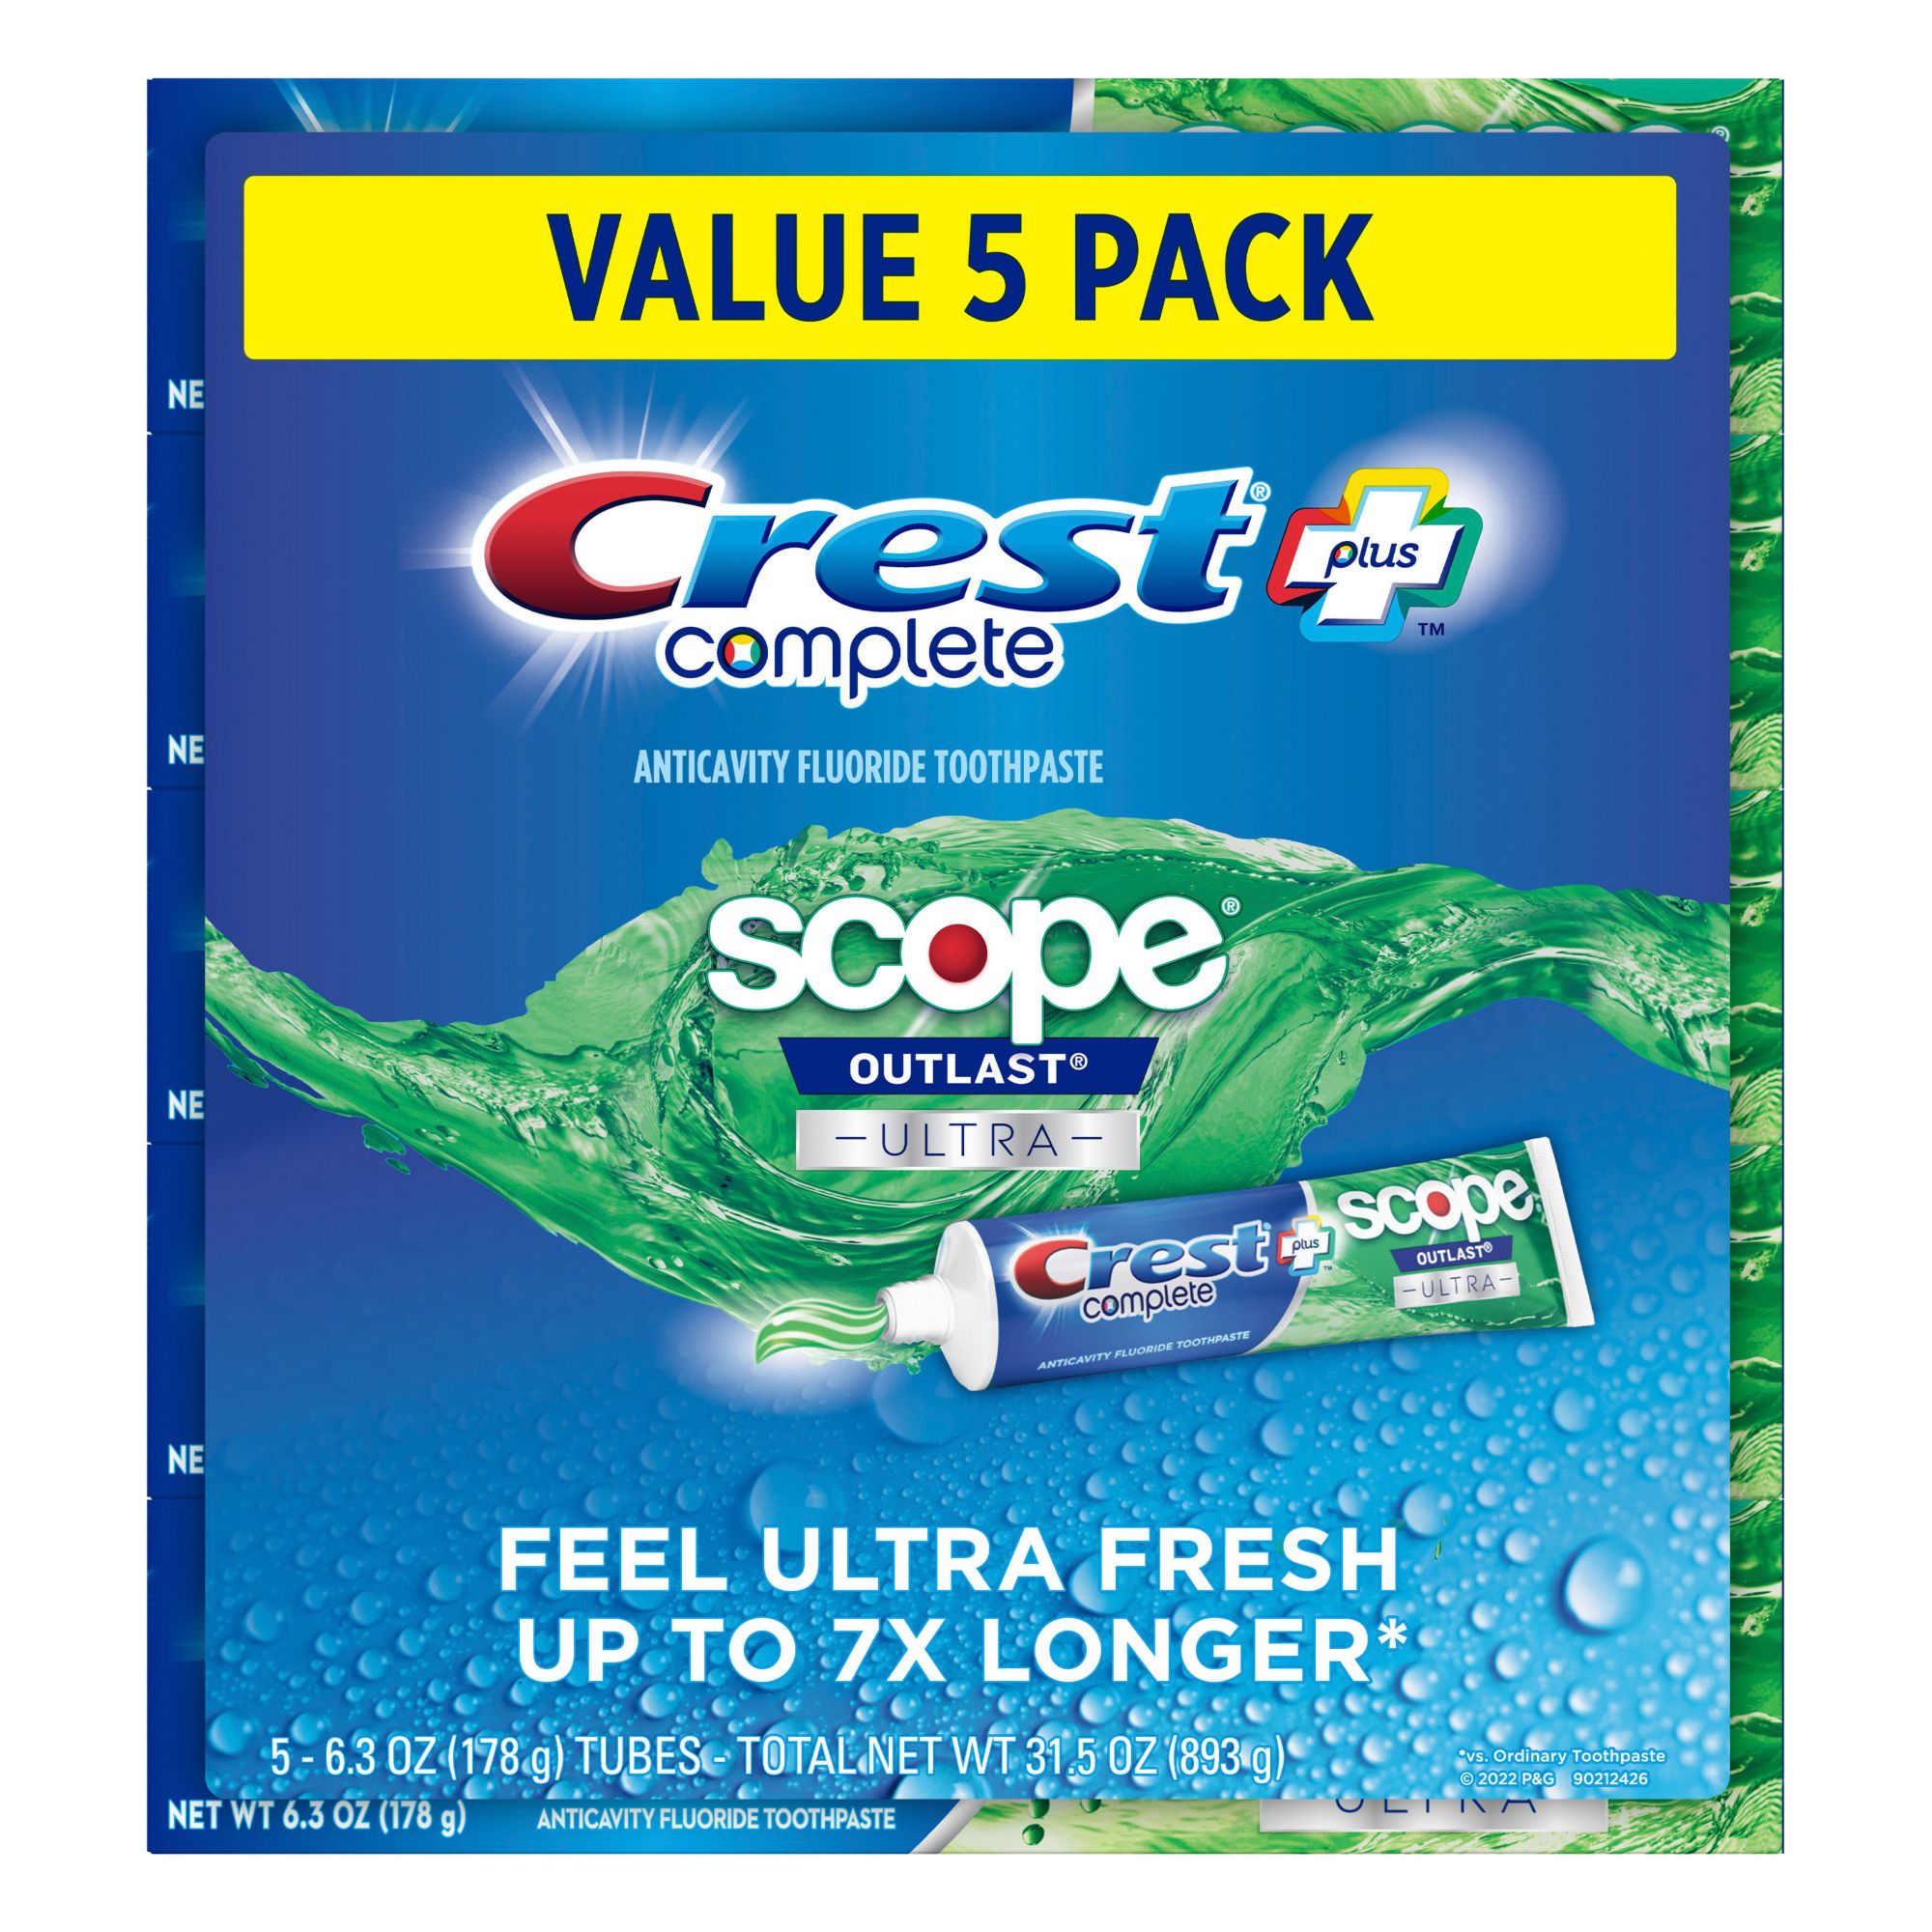 Crest Complete Plus Scope Outlast Ultra Toothpaste, 5 pk./6.3 oz.